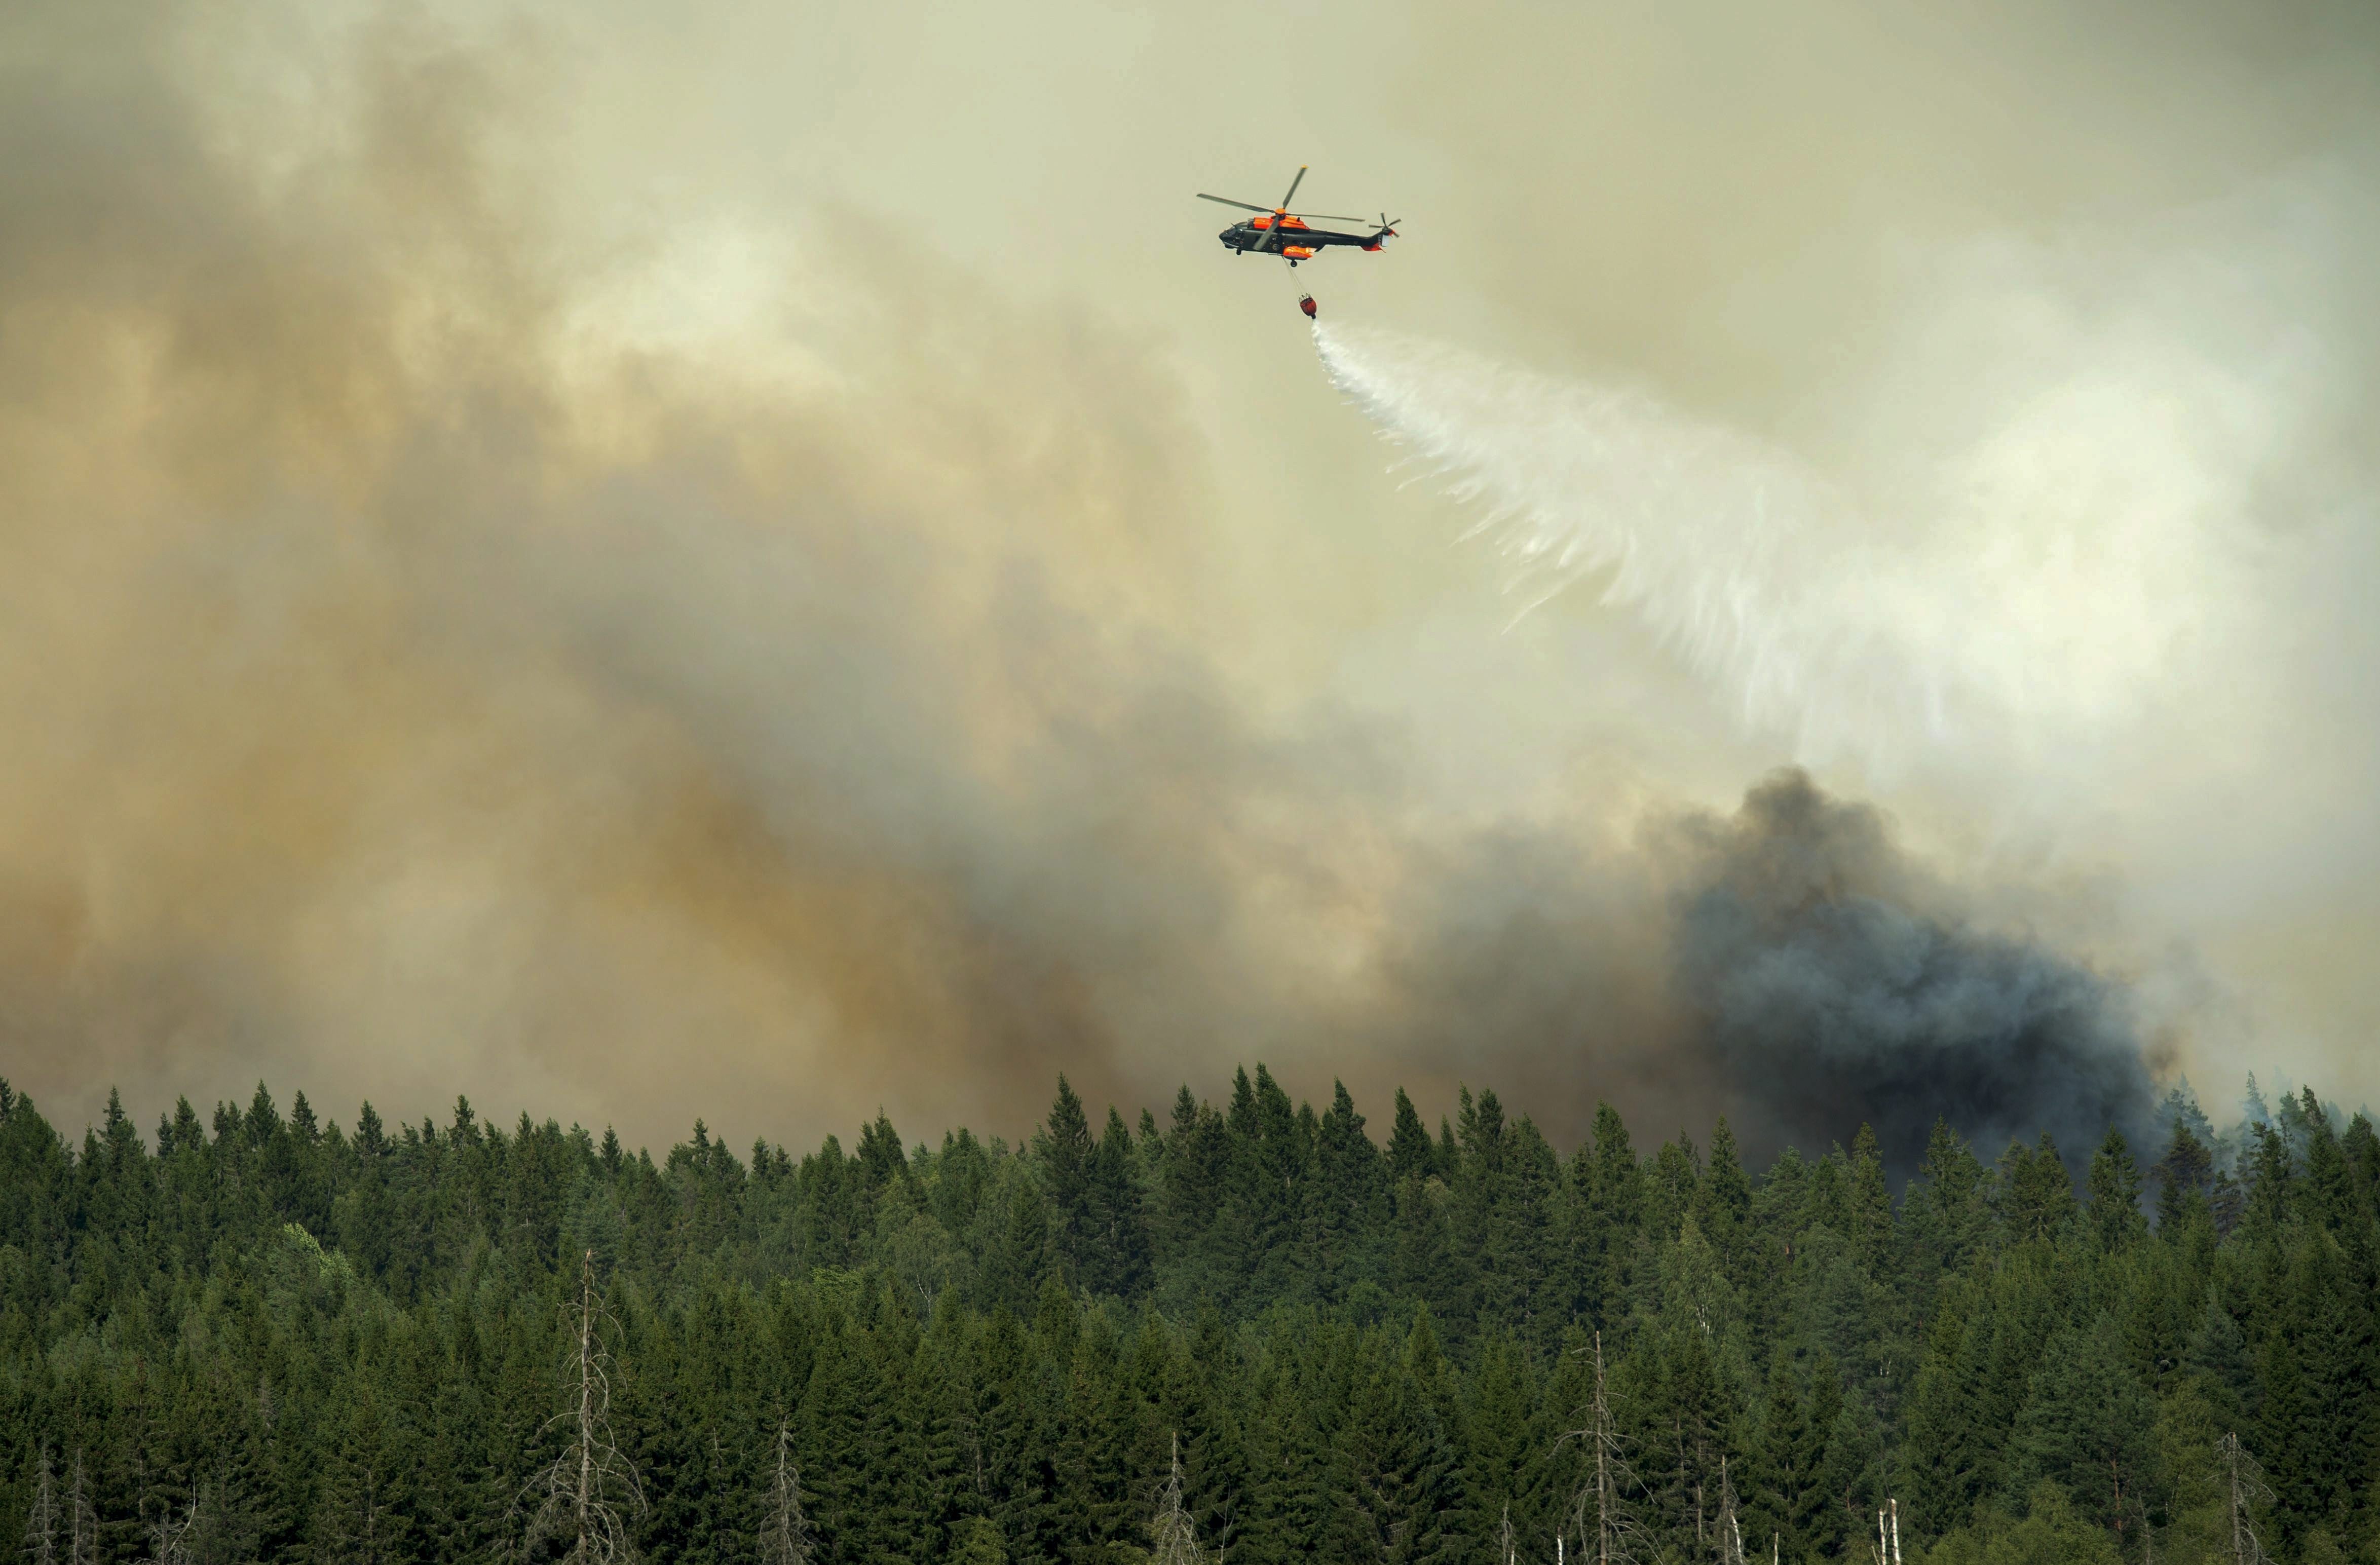 A helicopter drops its load of water on the wildfire front just outside the evacuated village of Gammelby near Sala, Central Sweden, on August 4, 2014. The fire, covering thousands of hectares, is in its fifth day and firefighters believe it will burn for weeks or even months. It is classified as the worst forest fire in Sweden's modern history. (Fredrik Sandberg /AFP/Getty Images)